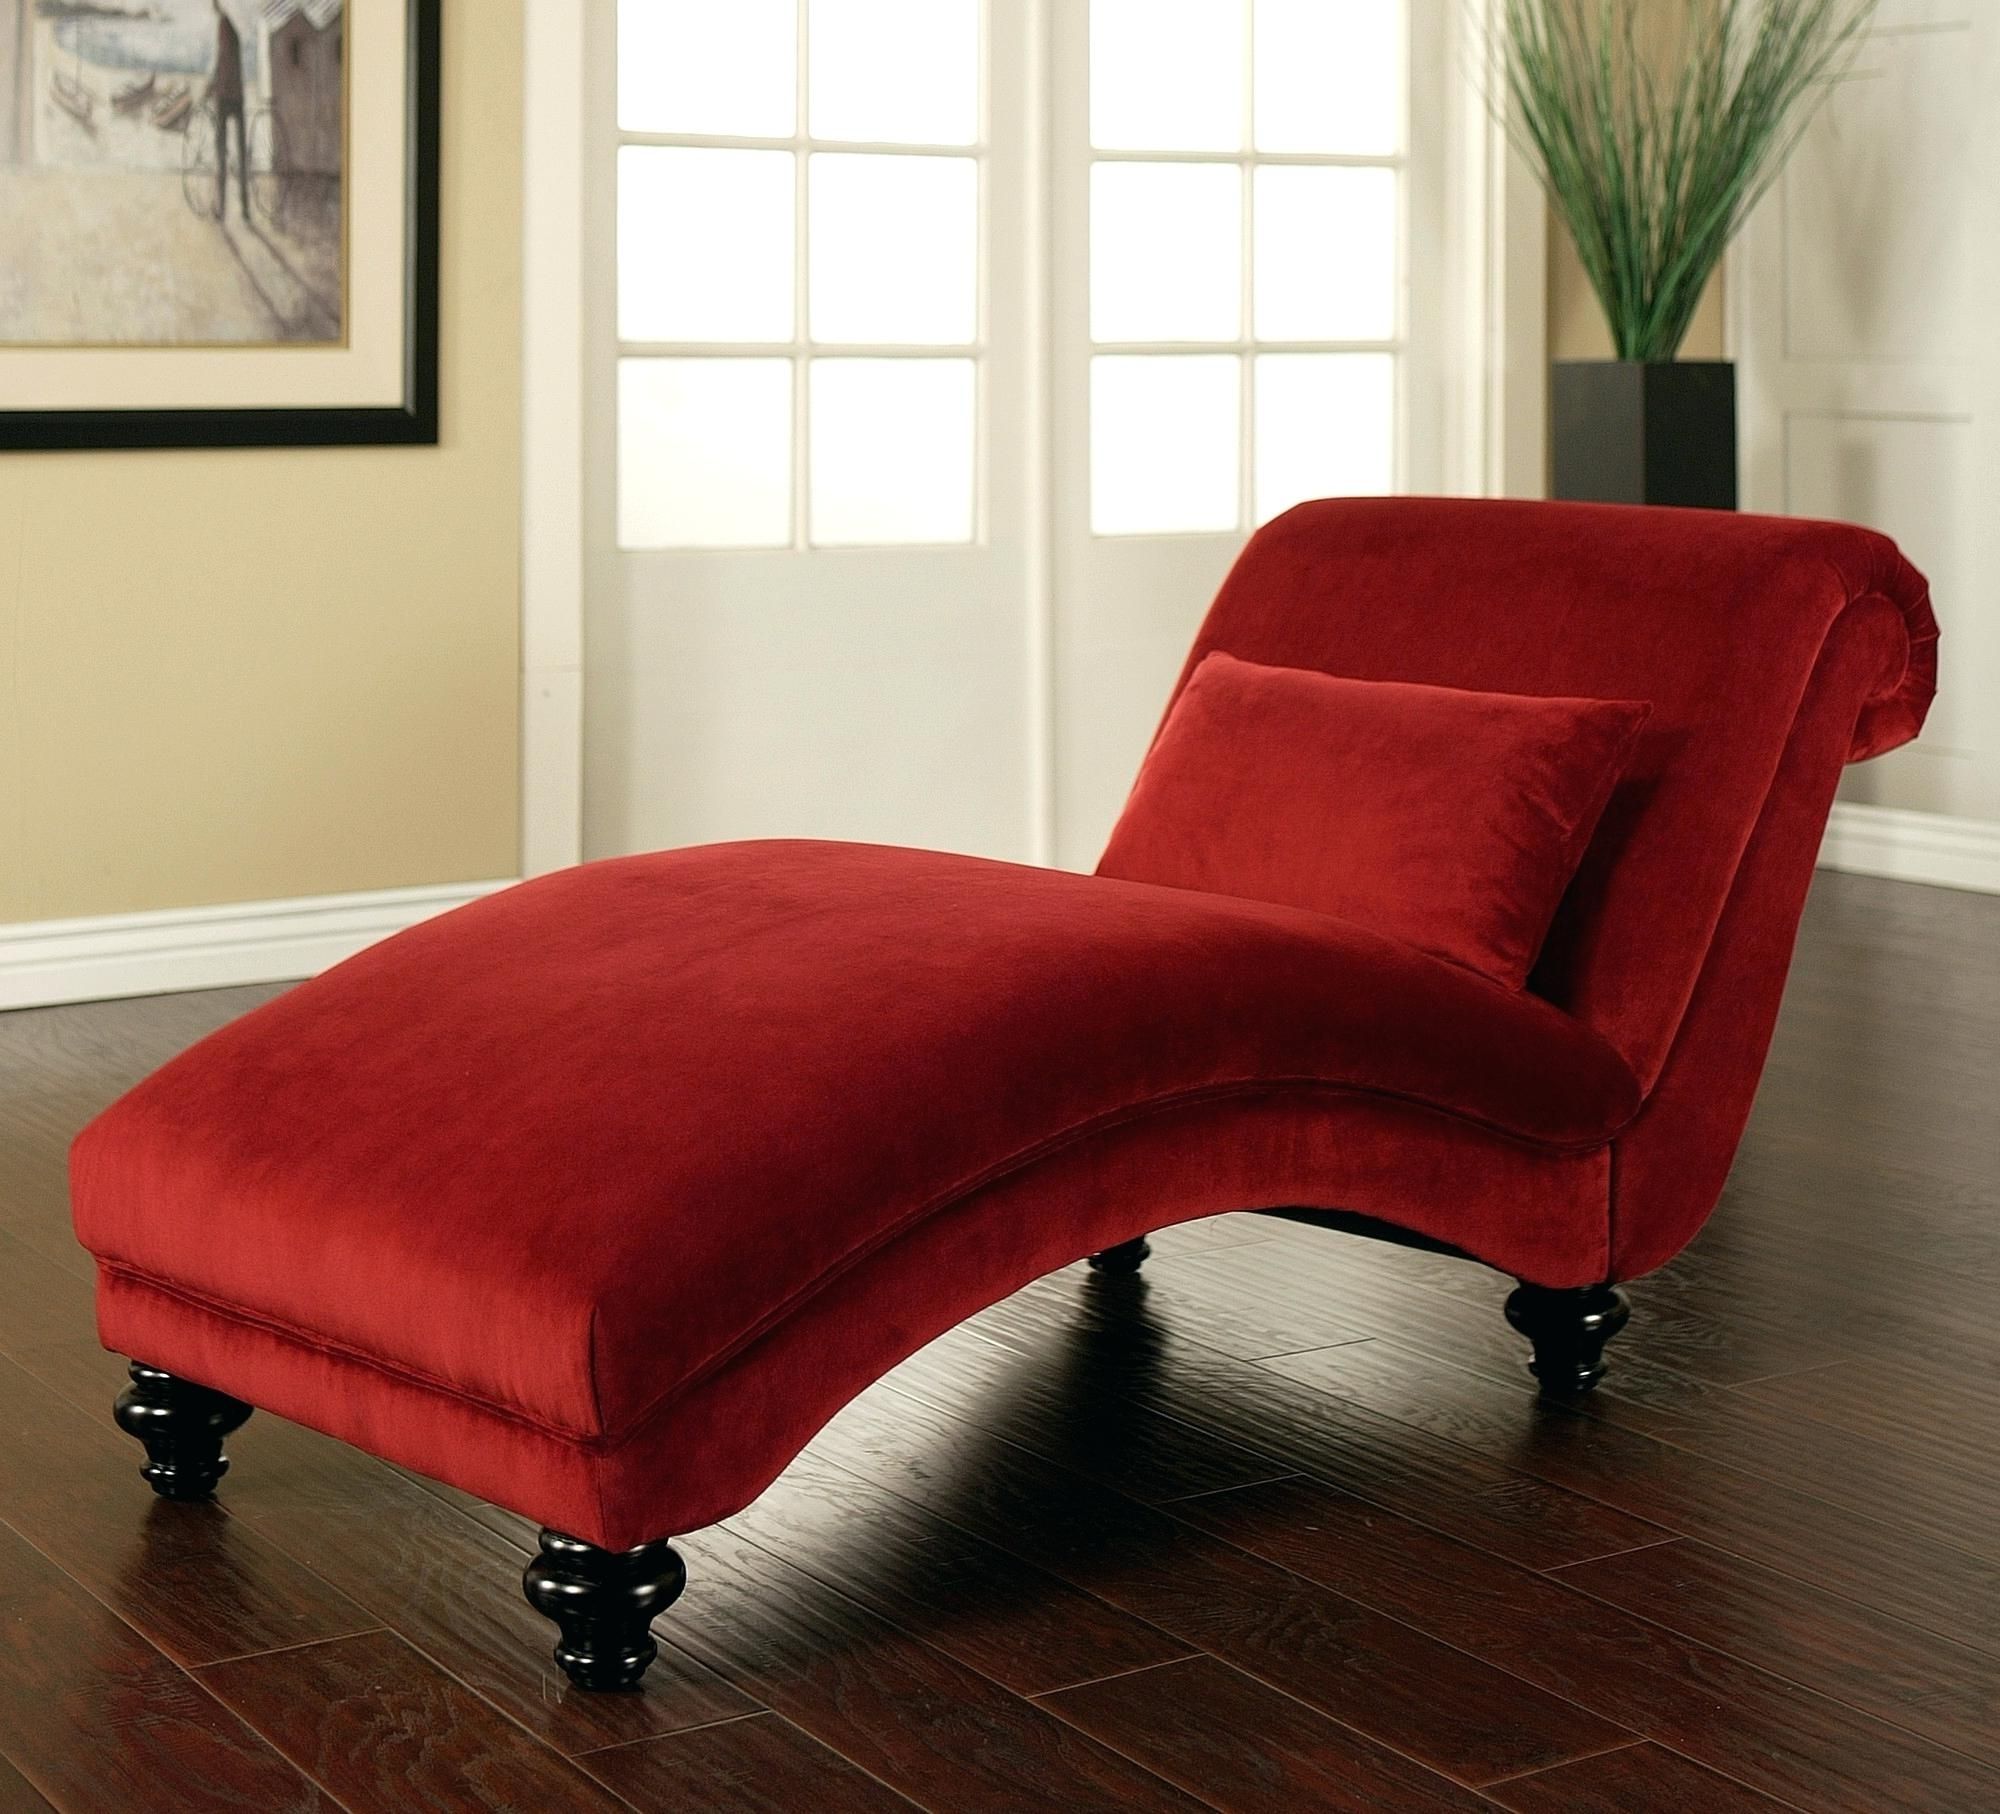 Well Known Curved Chaise Lounges For Best Ideas Of Chaise Lounge Red On Chaise Lounges Minimalist (Photo 4 of 15)